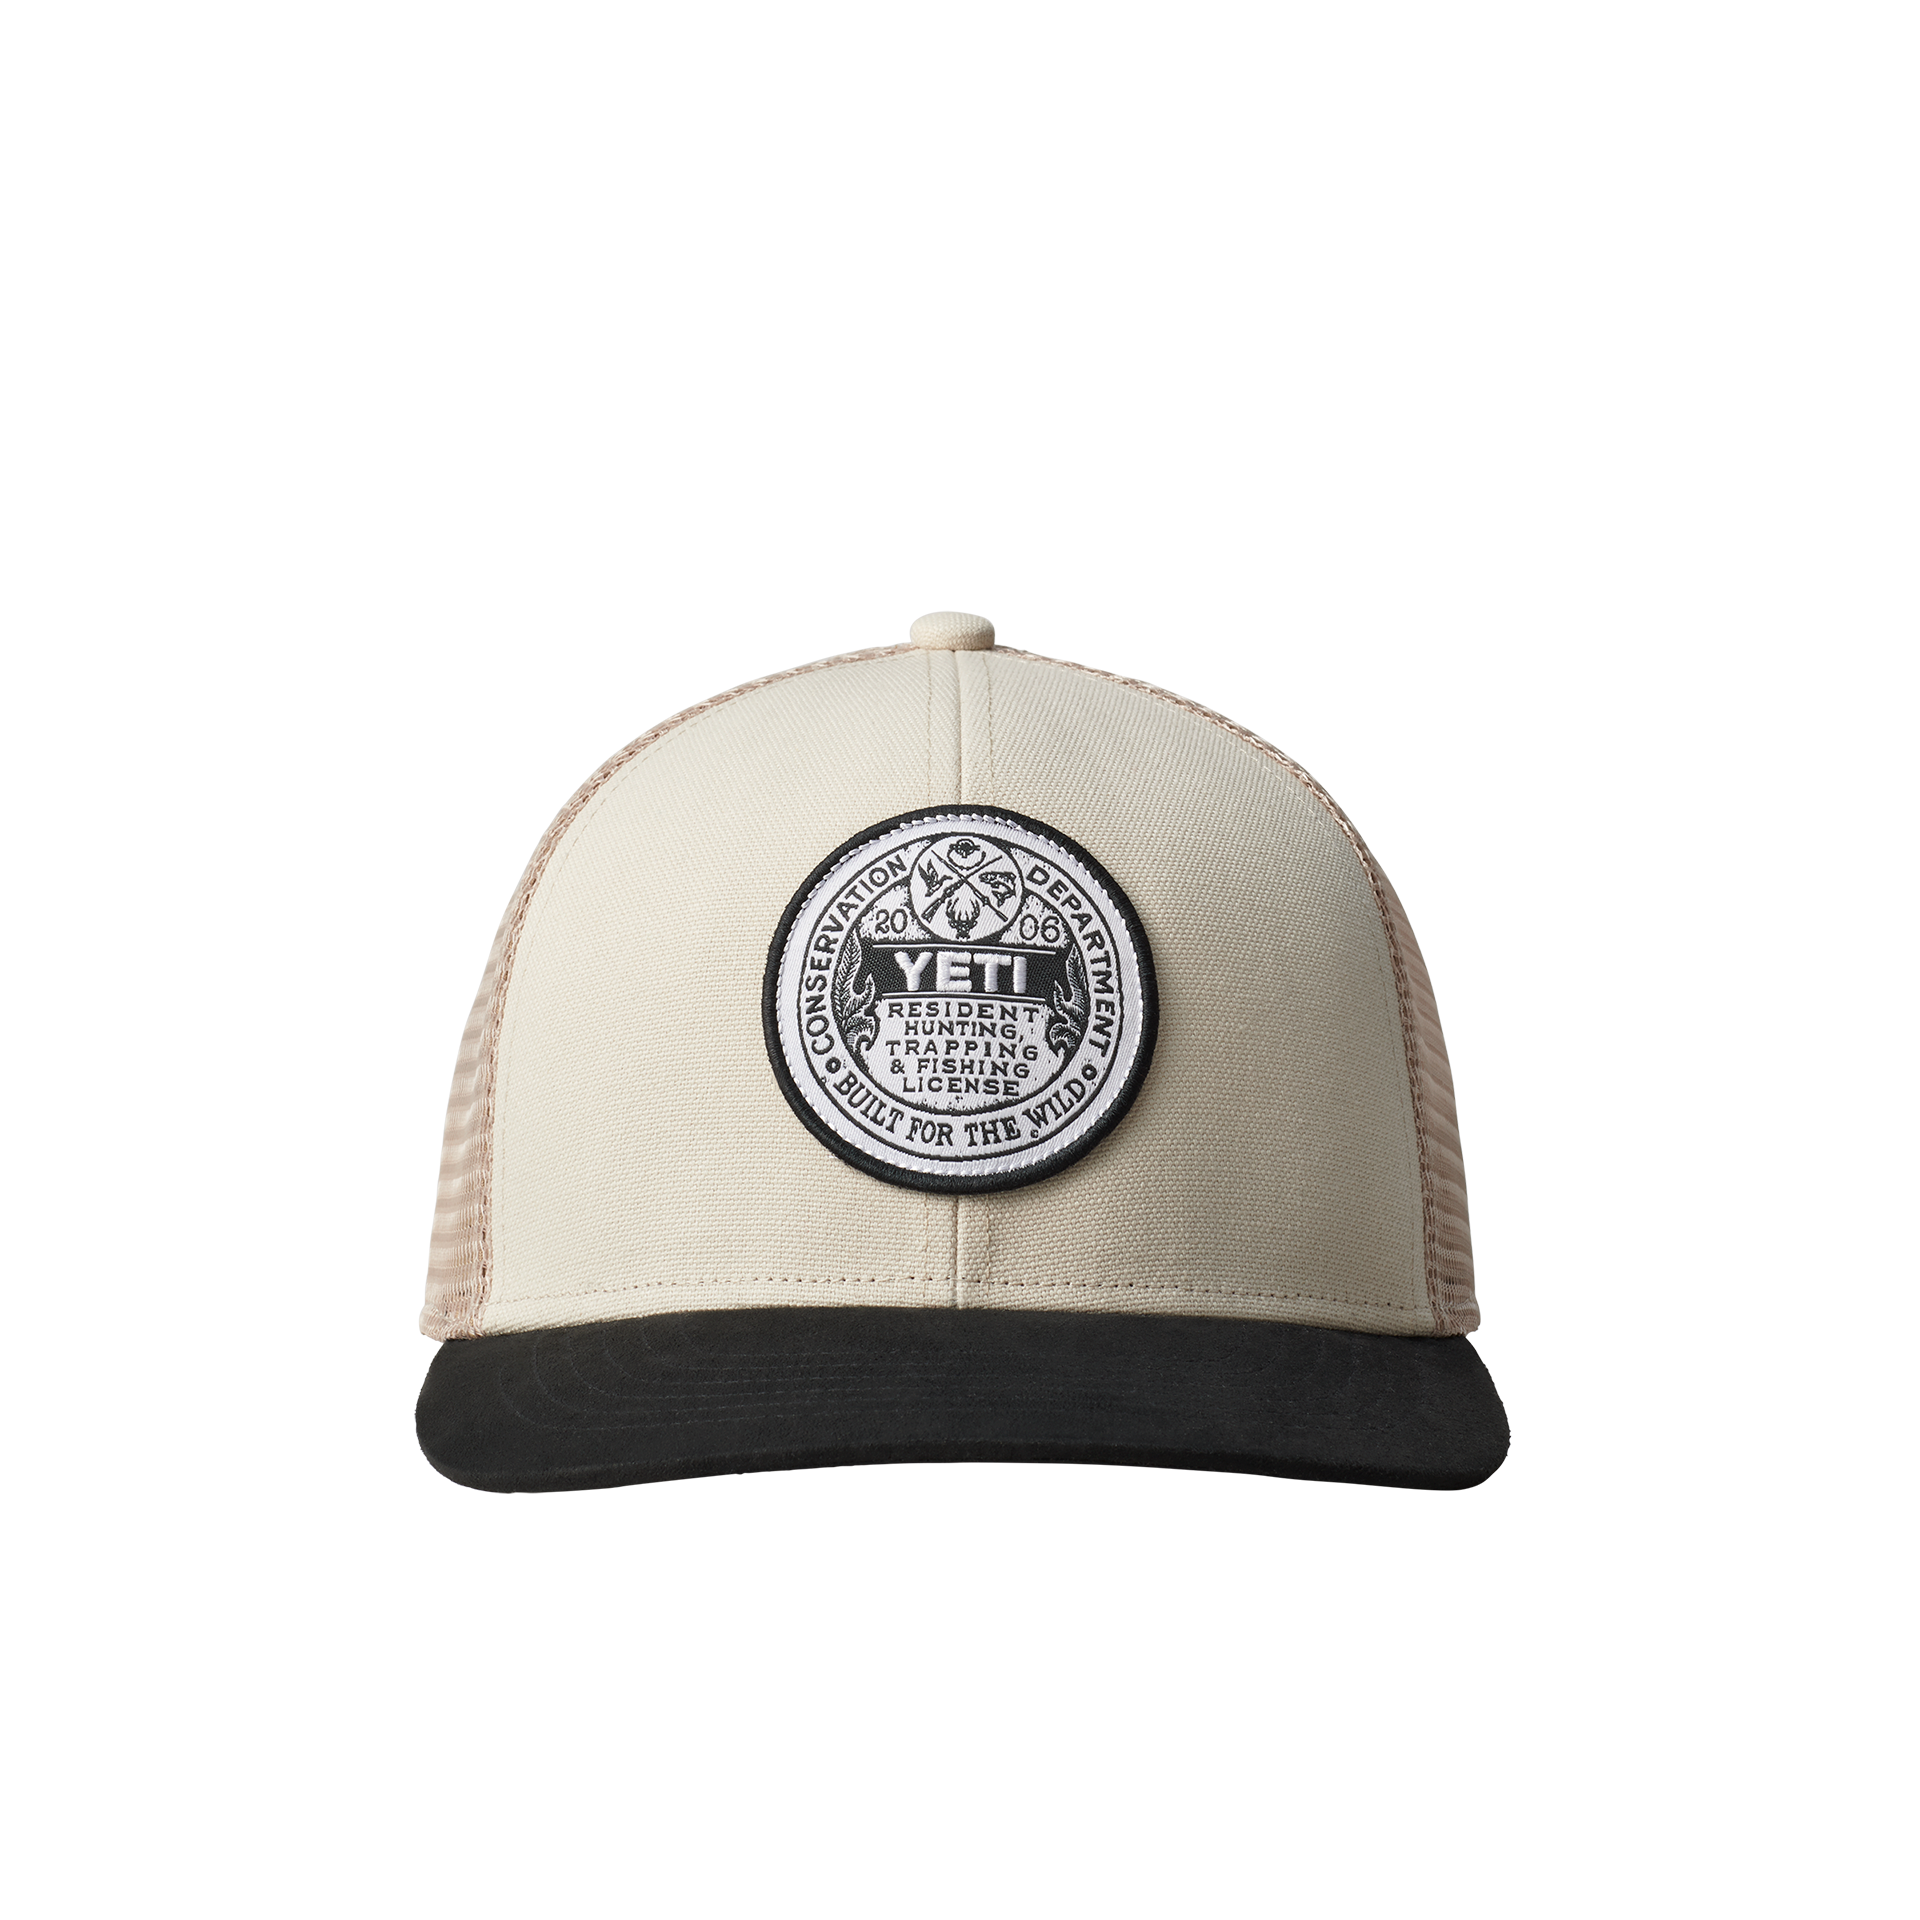 YETI TRAPPING LICENCE TRUCKER CAP Taupe